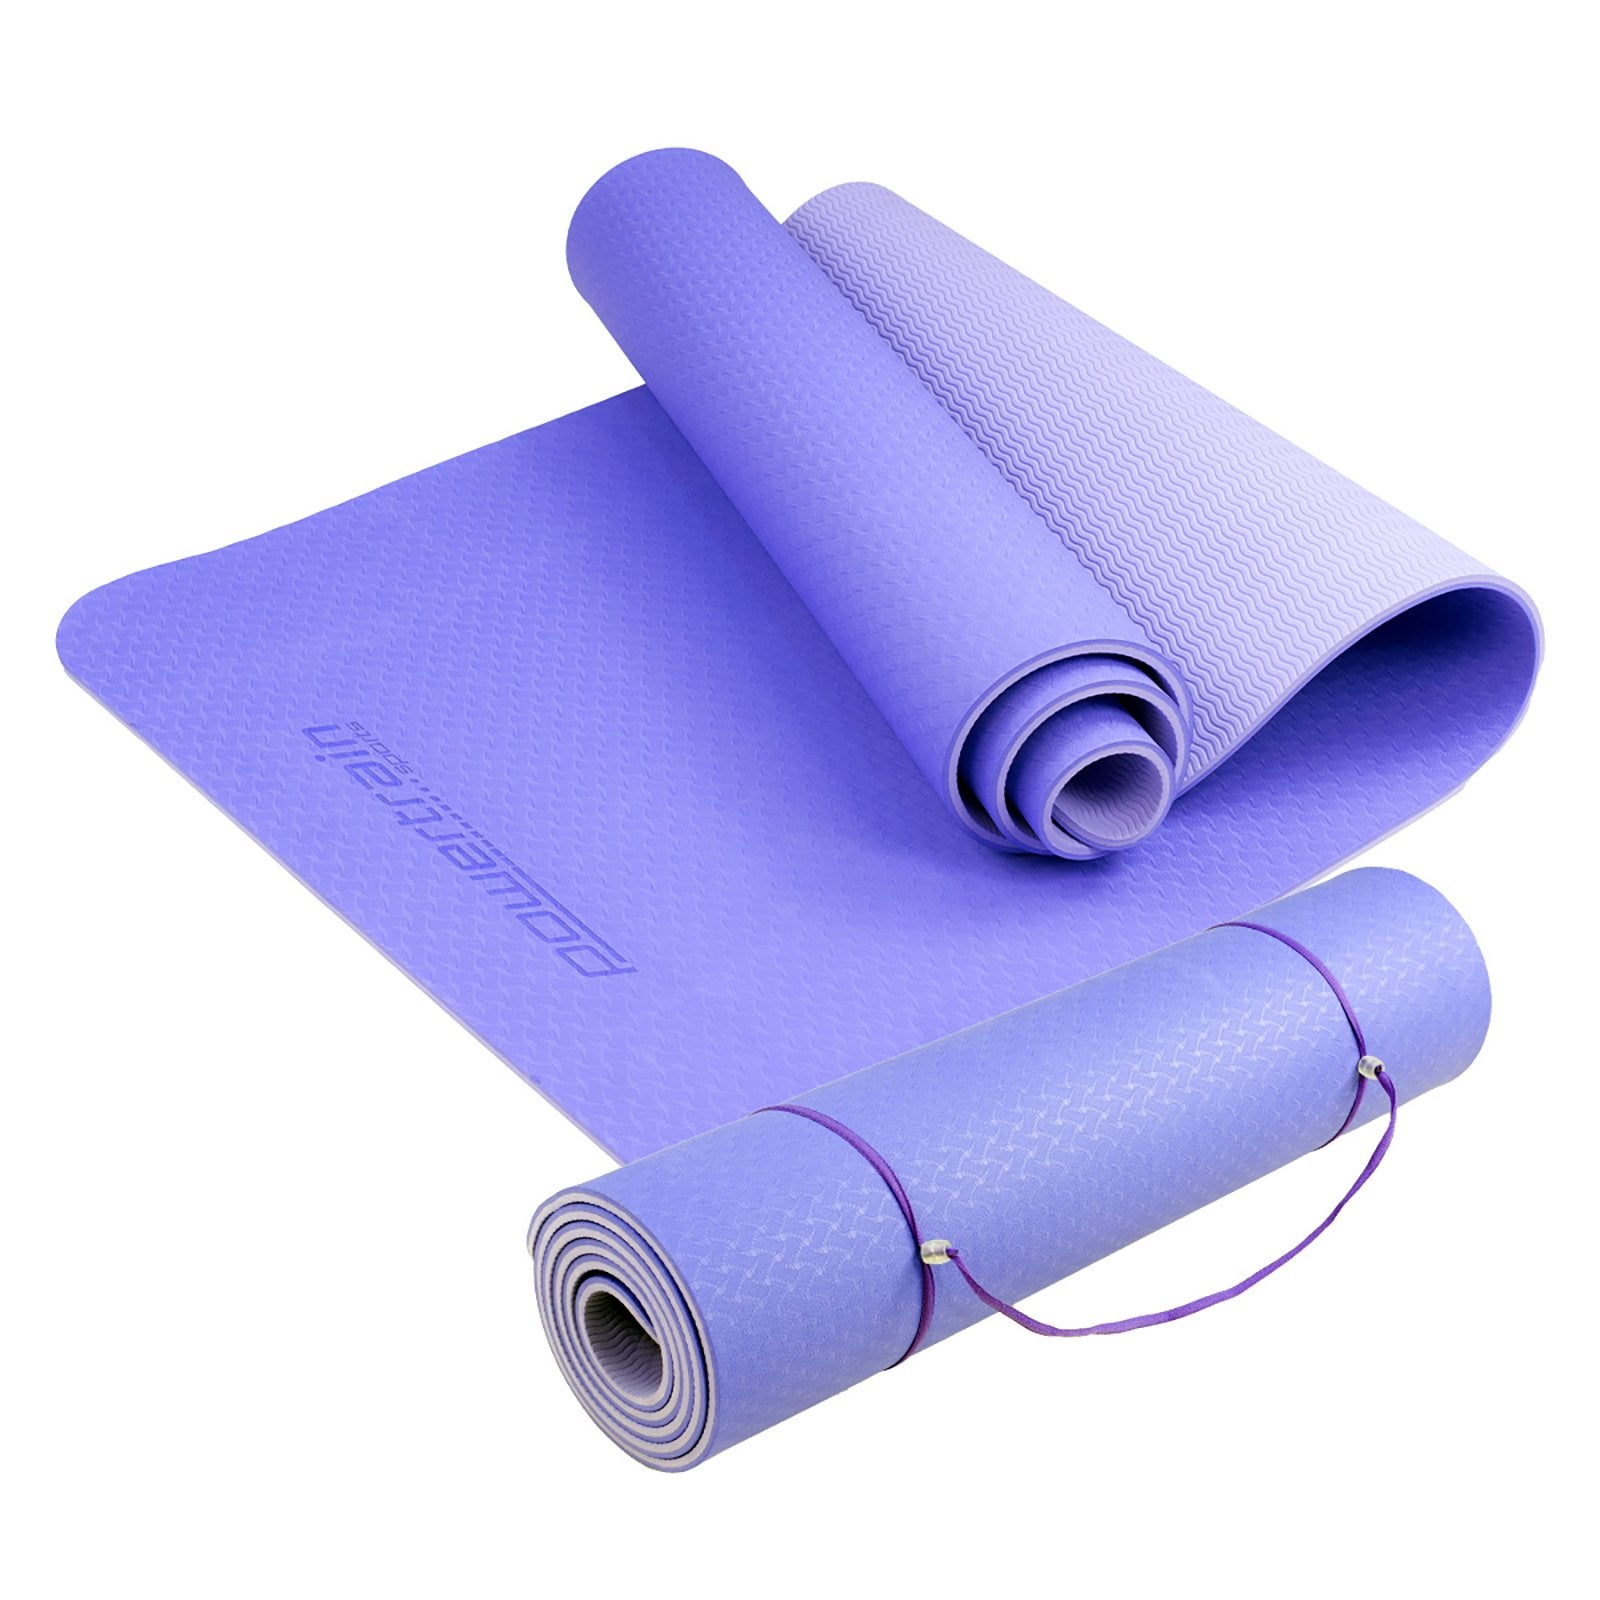 TPE Yoga Exercise Mat Eco Friendly Home Gym Pilates Floor Fitness 8mm Thick - Light Purple